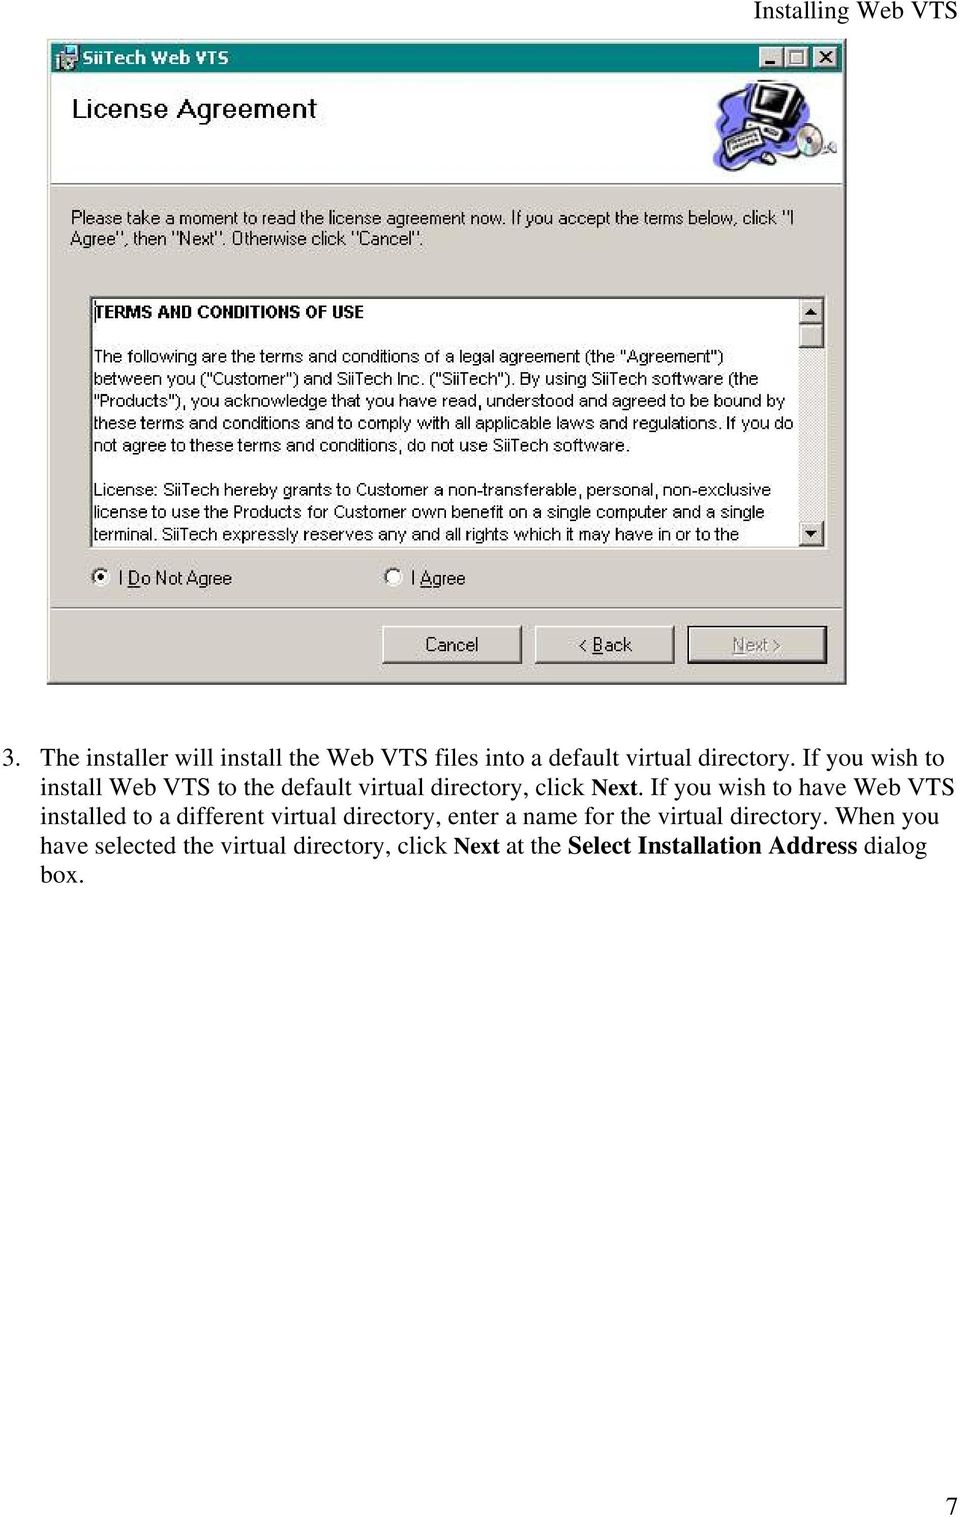 If you wish to install Web VTS to the default virtual directory, click Next.